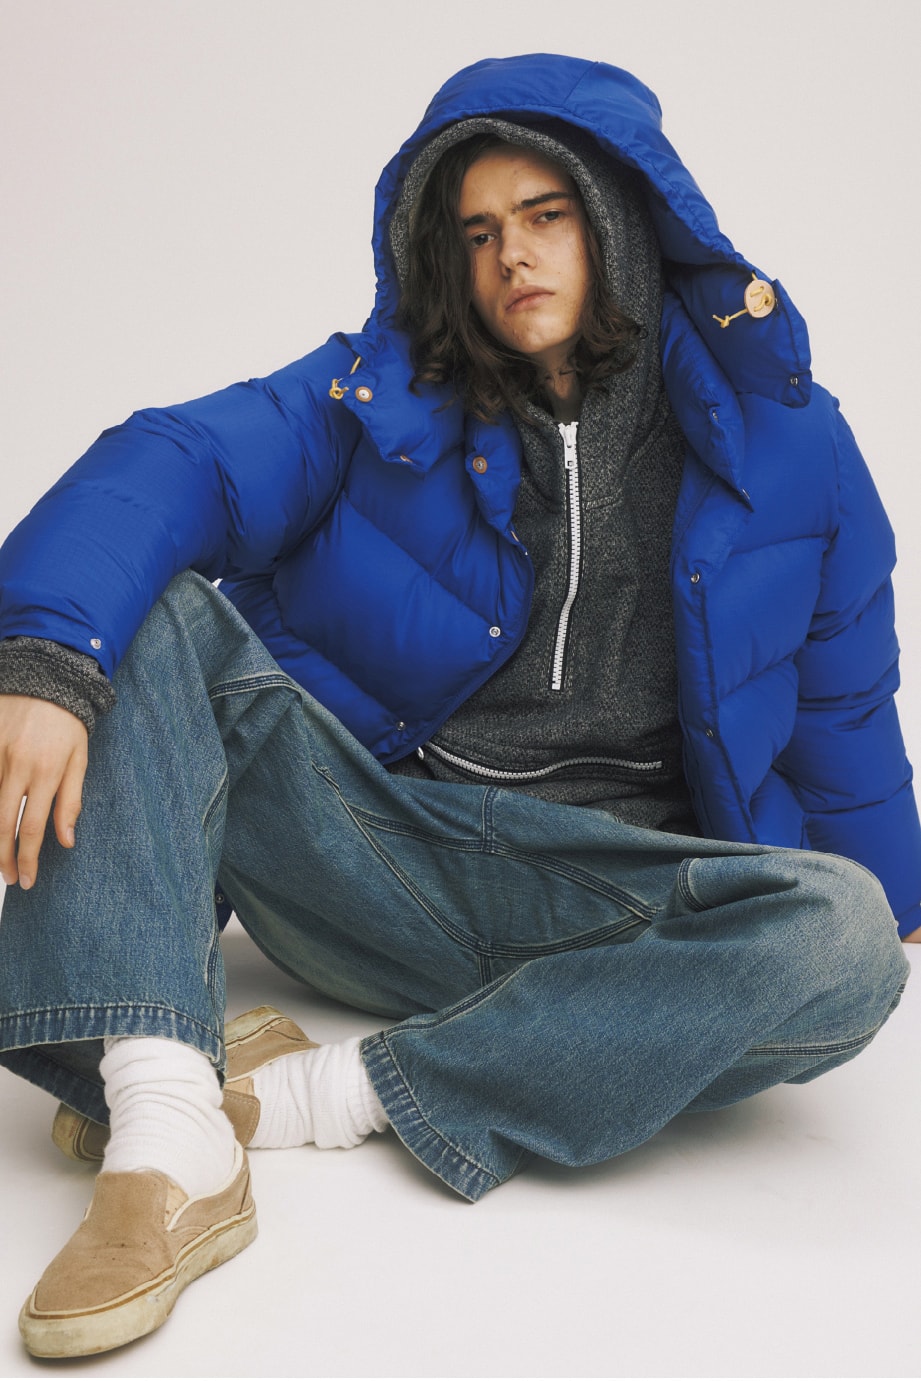 THE NORTH FACE PURPLE LABEL Fall Winter 2018 Lookbook Jackets Outerwear Hoodies Sweaters Pants Trousers Cardigans Scarves Hats Caps